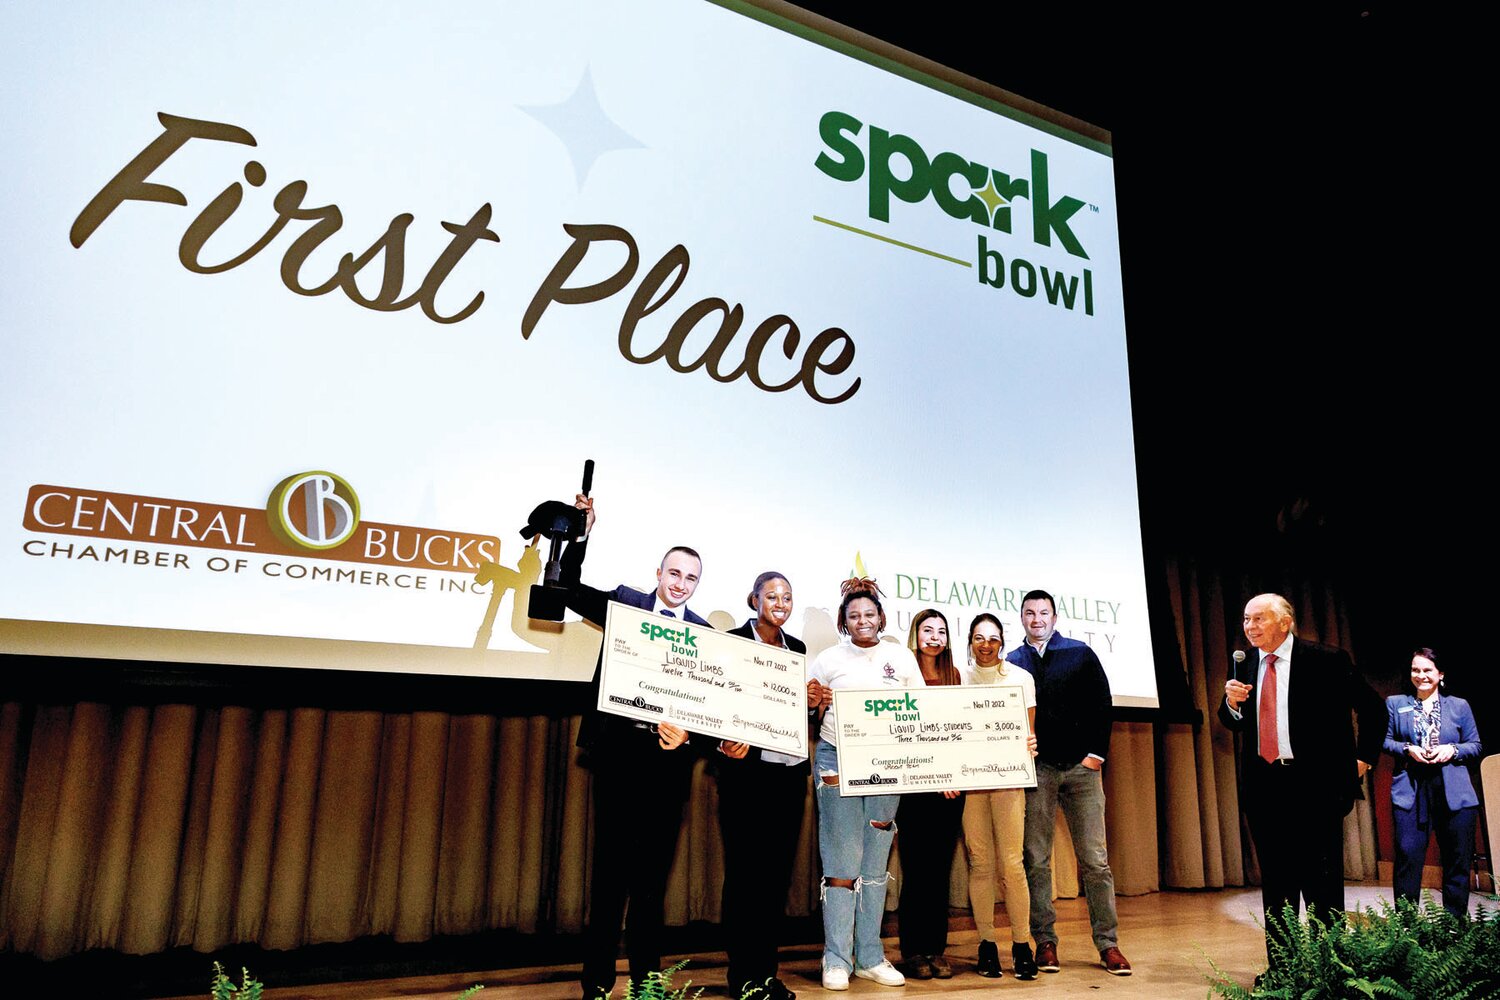 Last year's Spark Bowl winners, James Calcagni and Amoyah Gilliam, founders of Liquid Limbs, receive their prize onstage at Delaware Valley University.